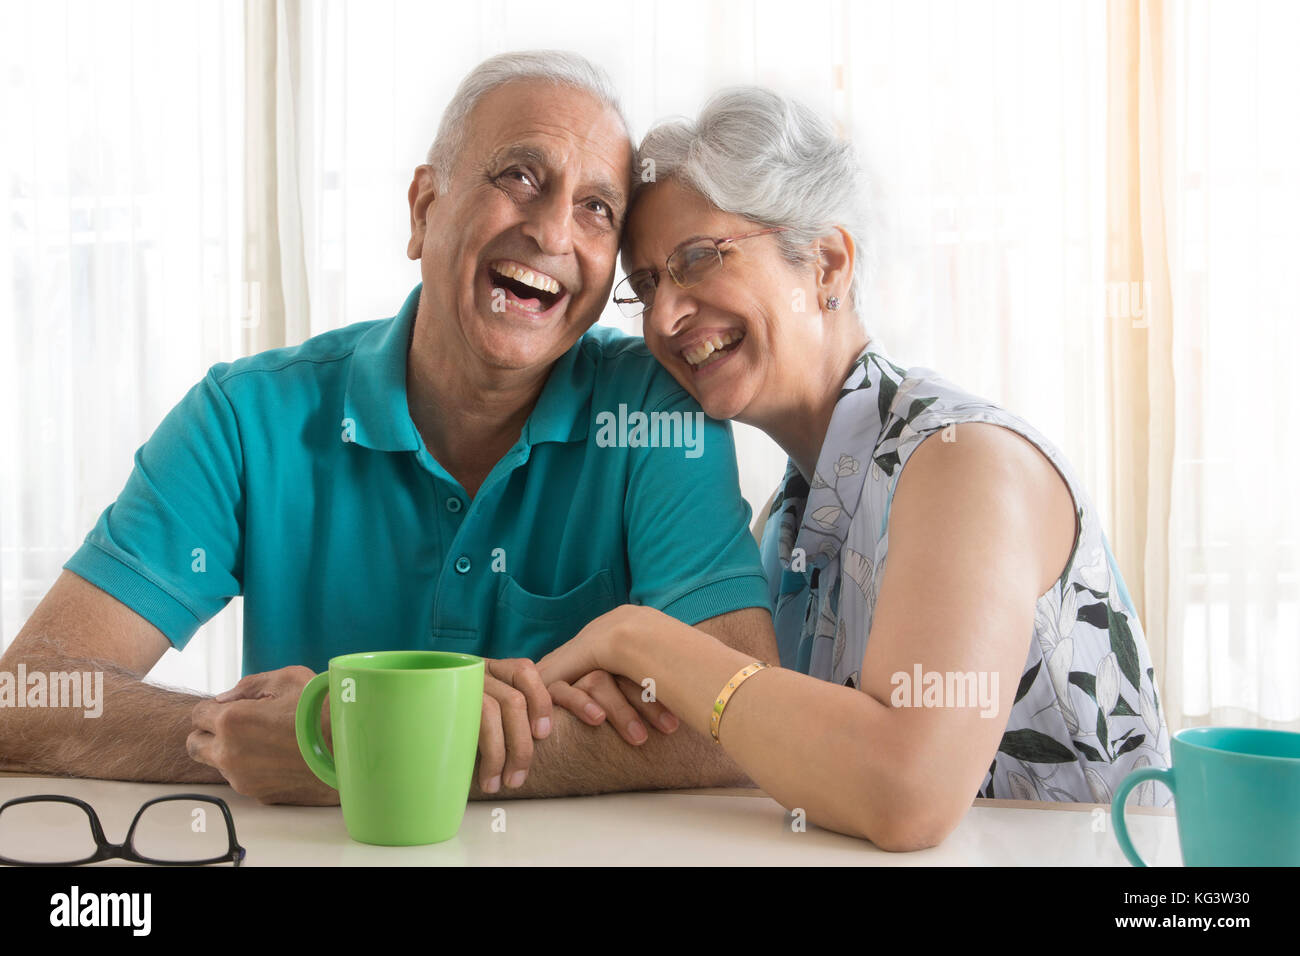 Senior couple laughing while drinking coffee at table Stock Photo